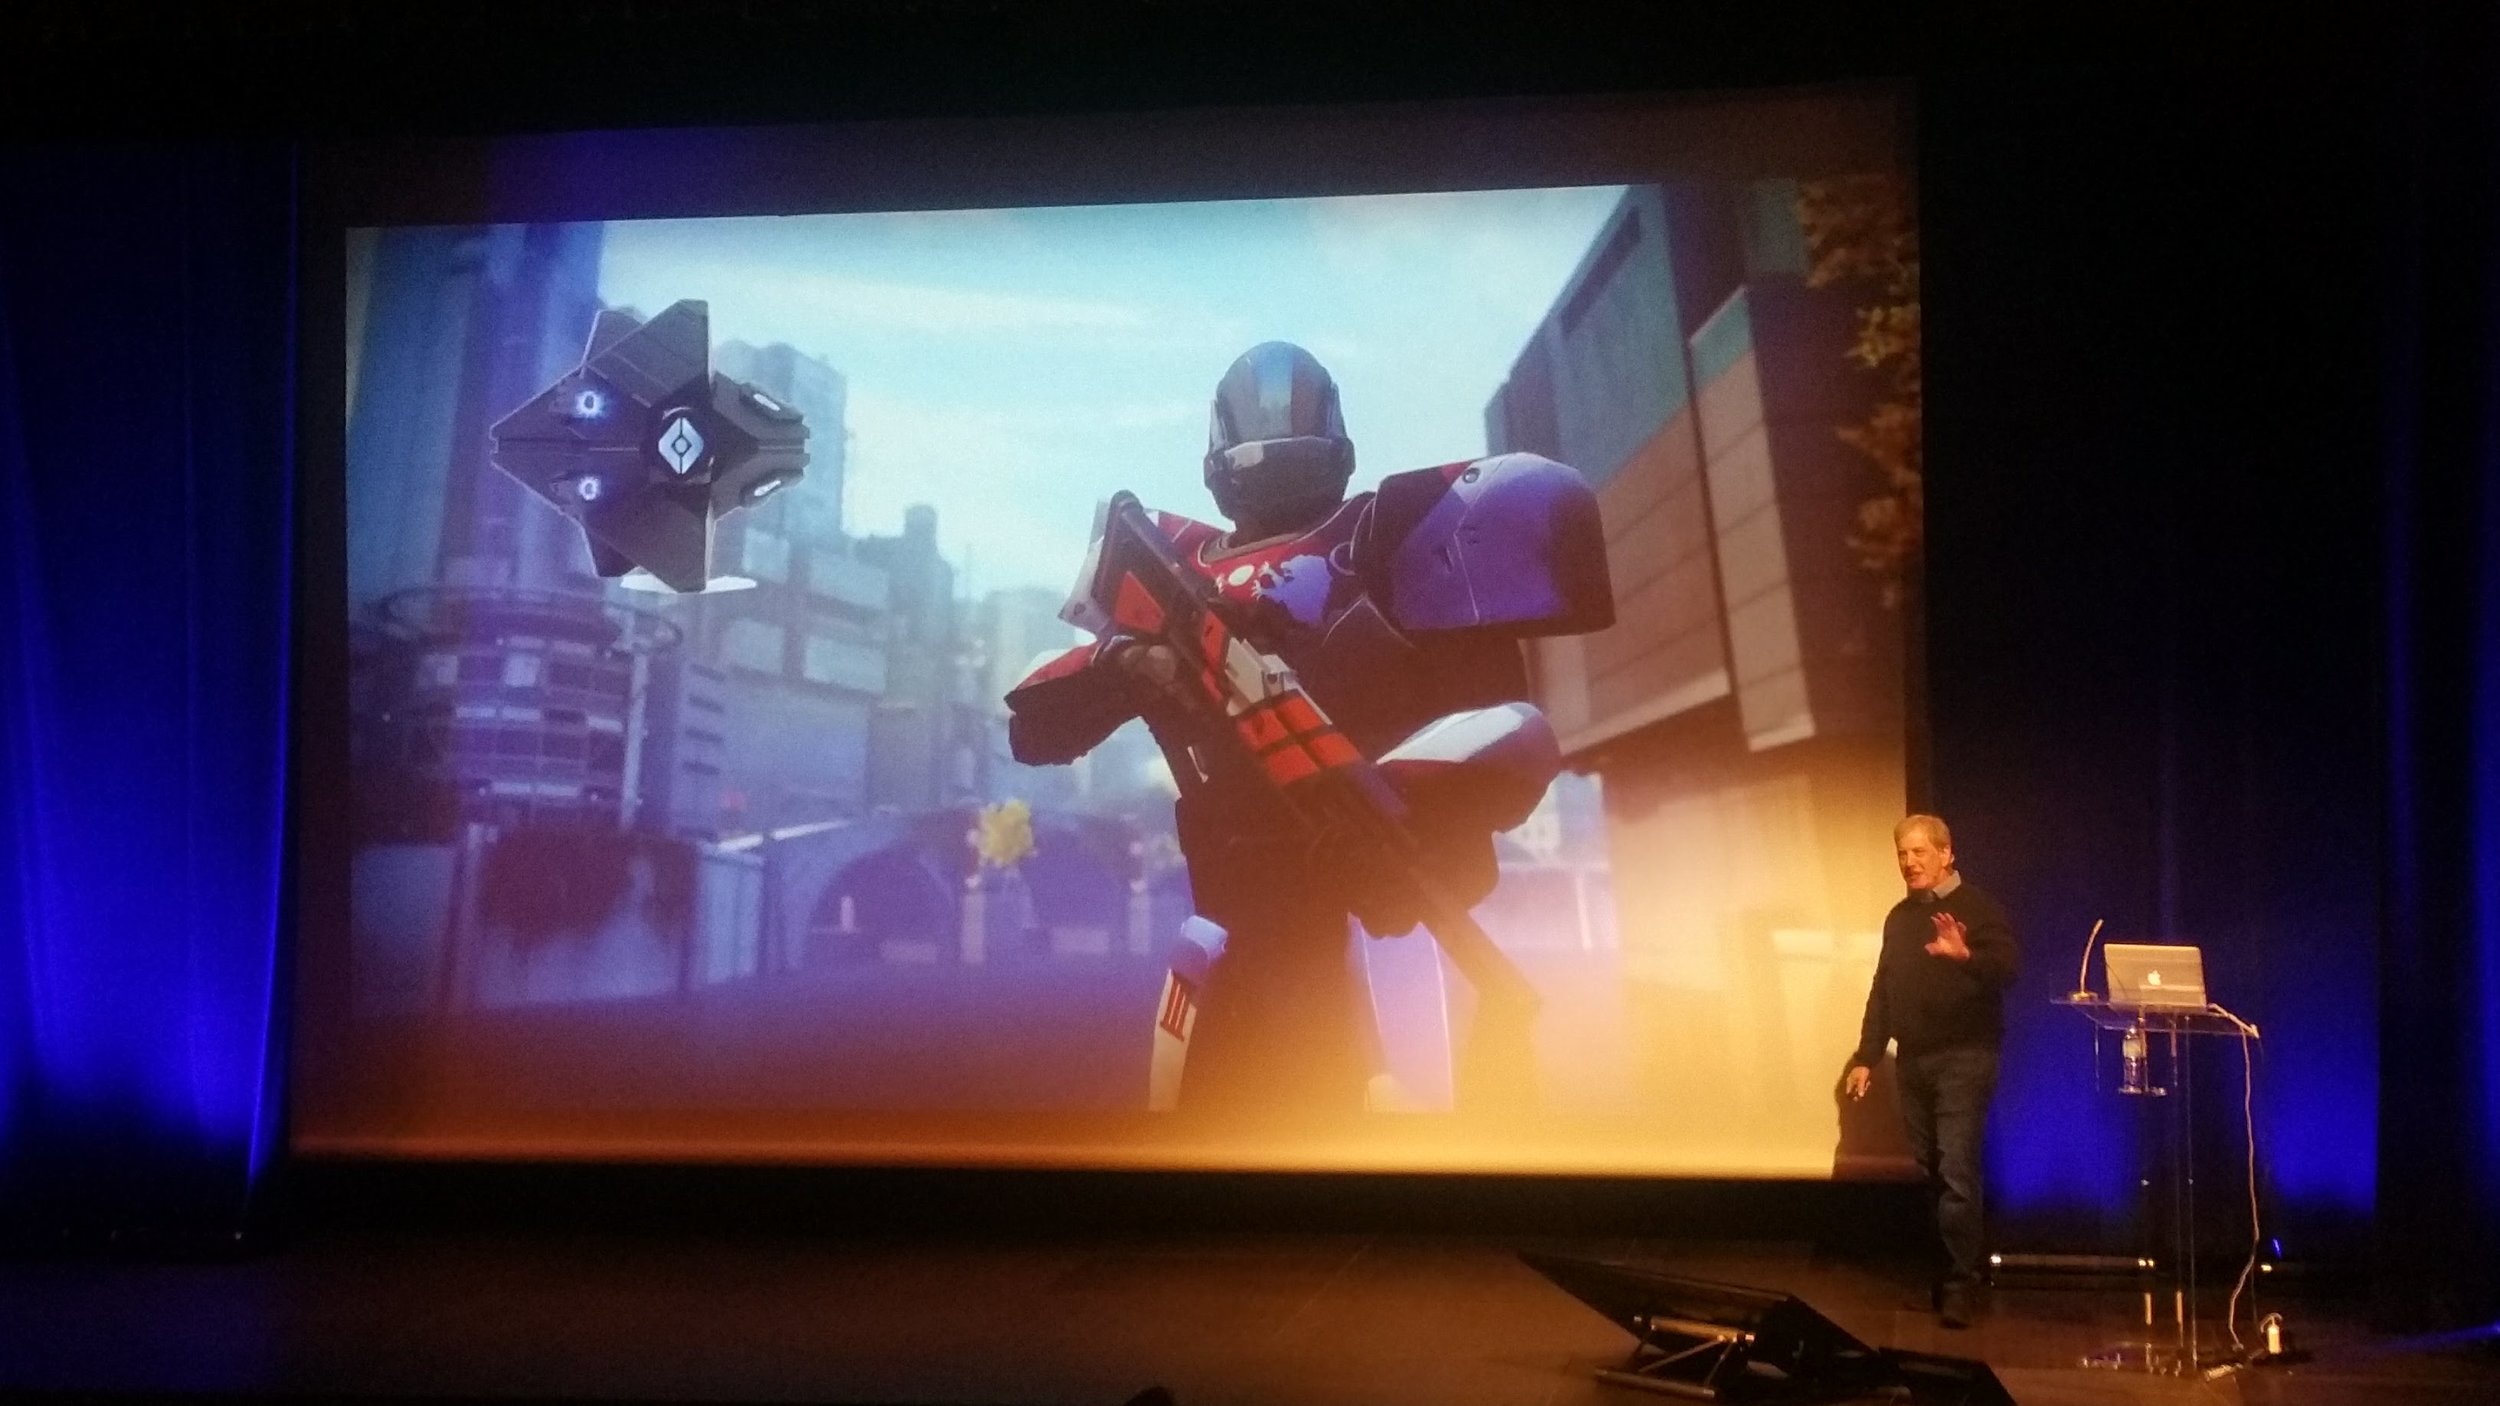 John Newton introduced Destiny 2 as a good example of user interface interactions